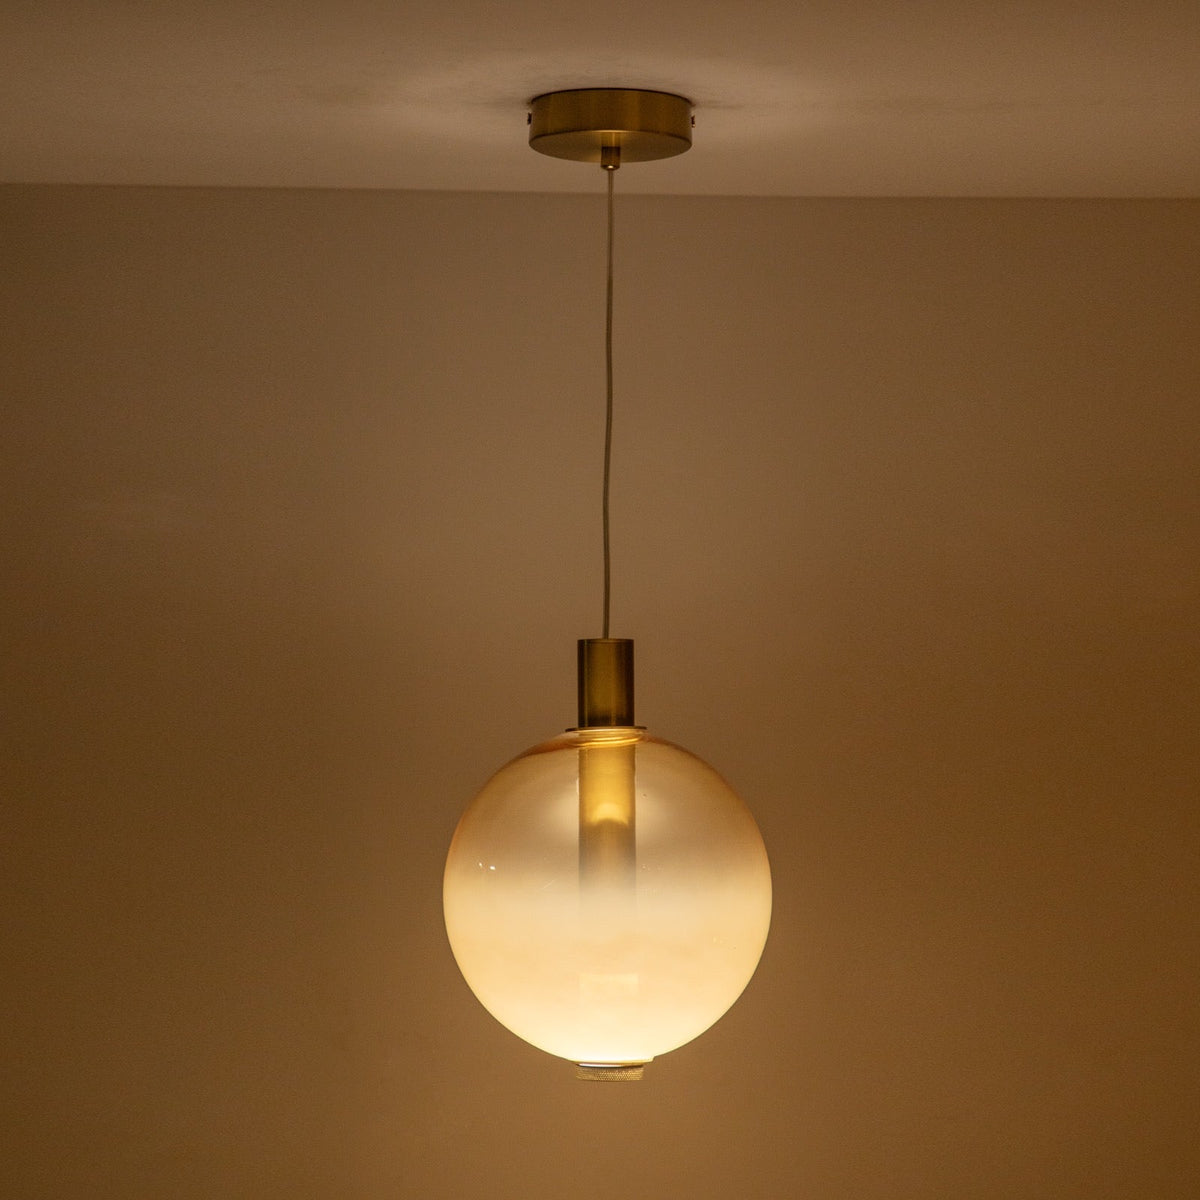 Cloudy Day LED Pendant Light online